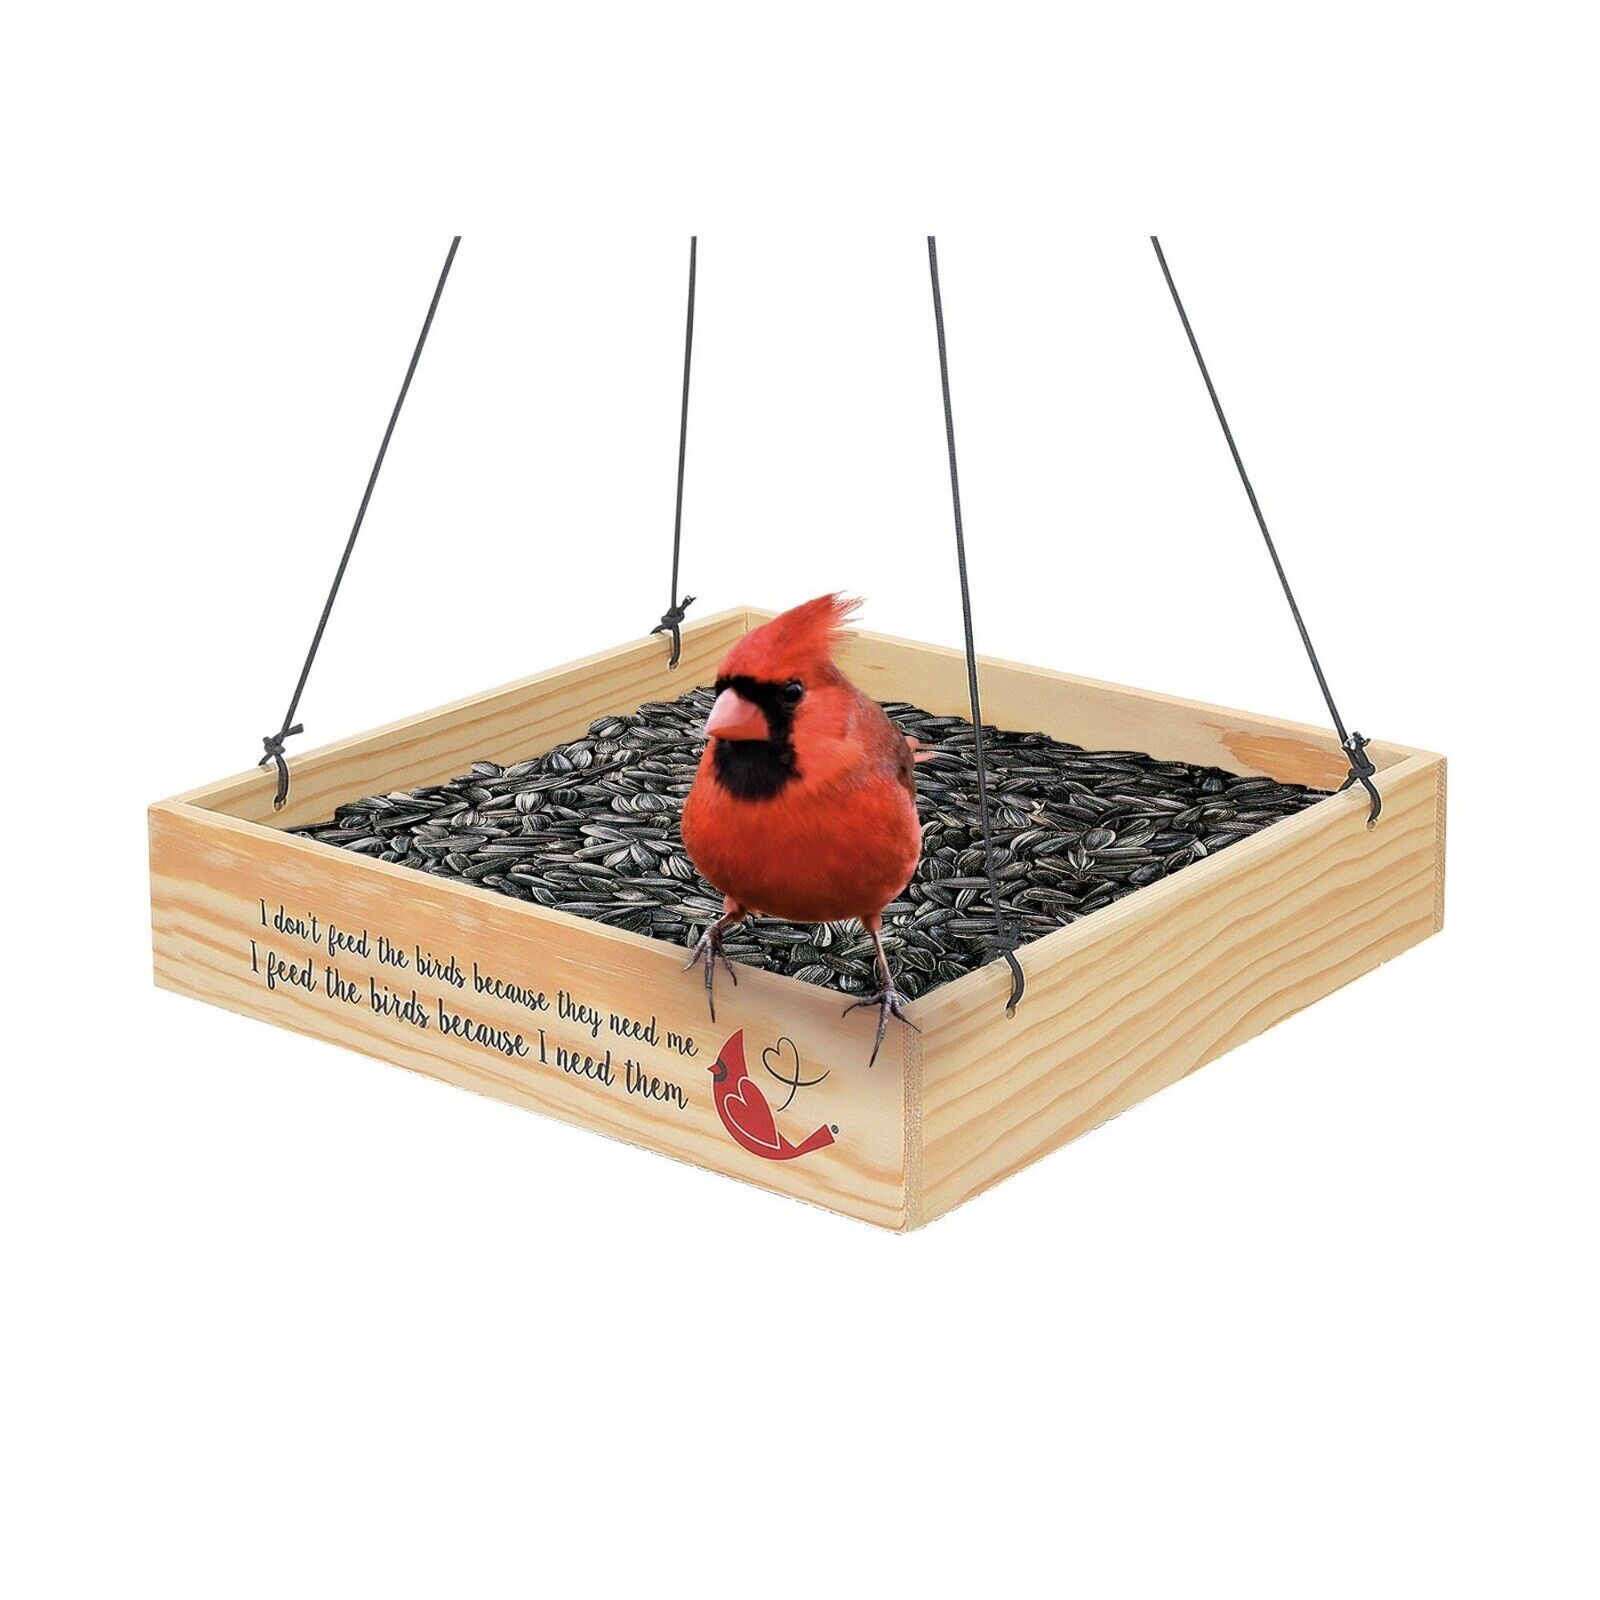 Cardinal Tray Bird Feeder with Sentiment Hanging Wooden 9.8" Square Mesh Bottom - $34.64